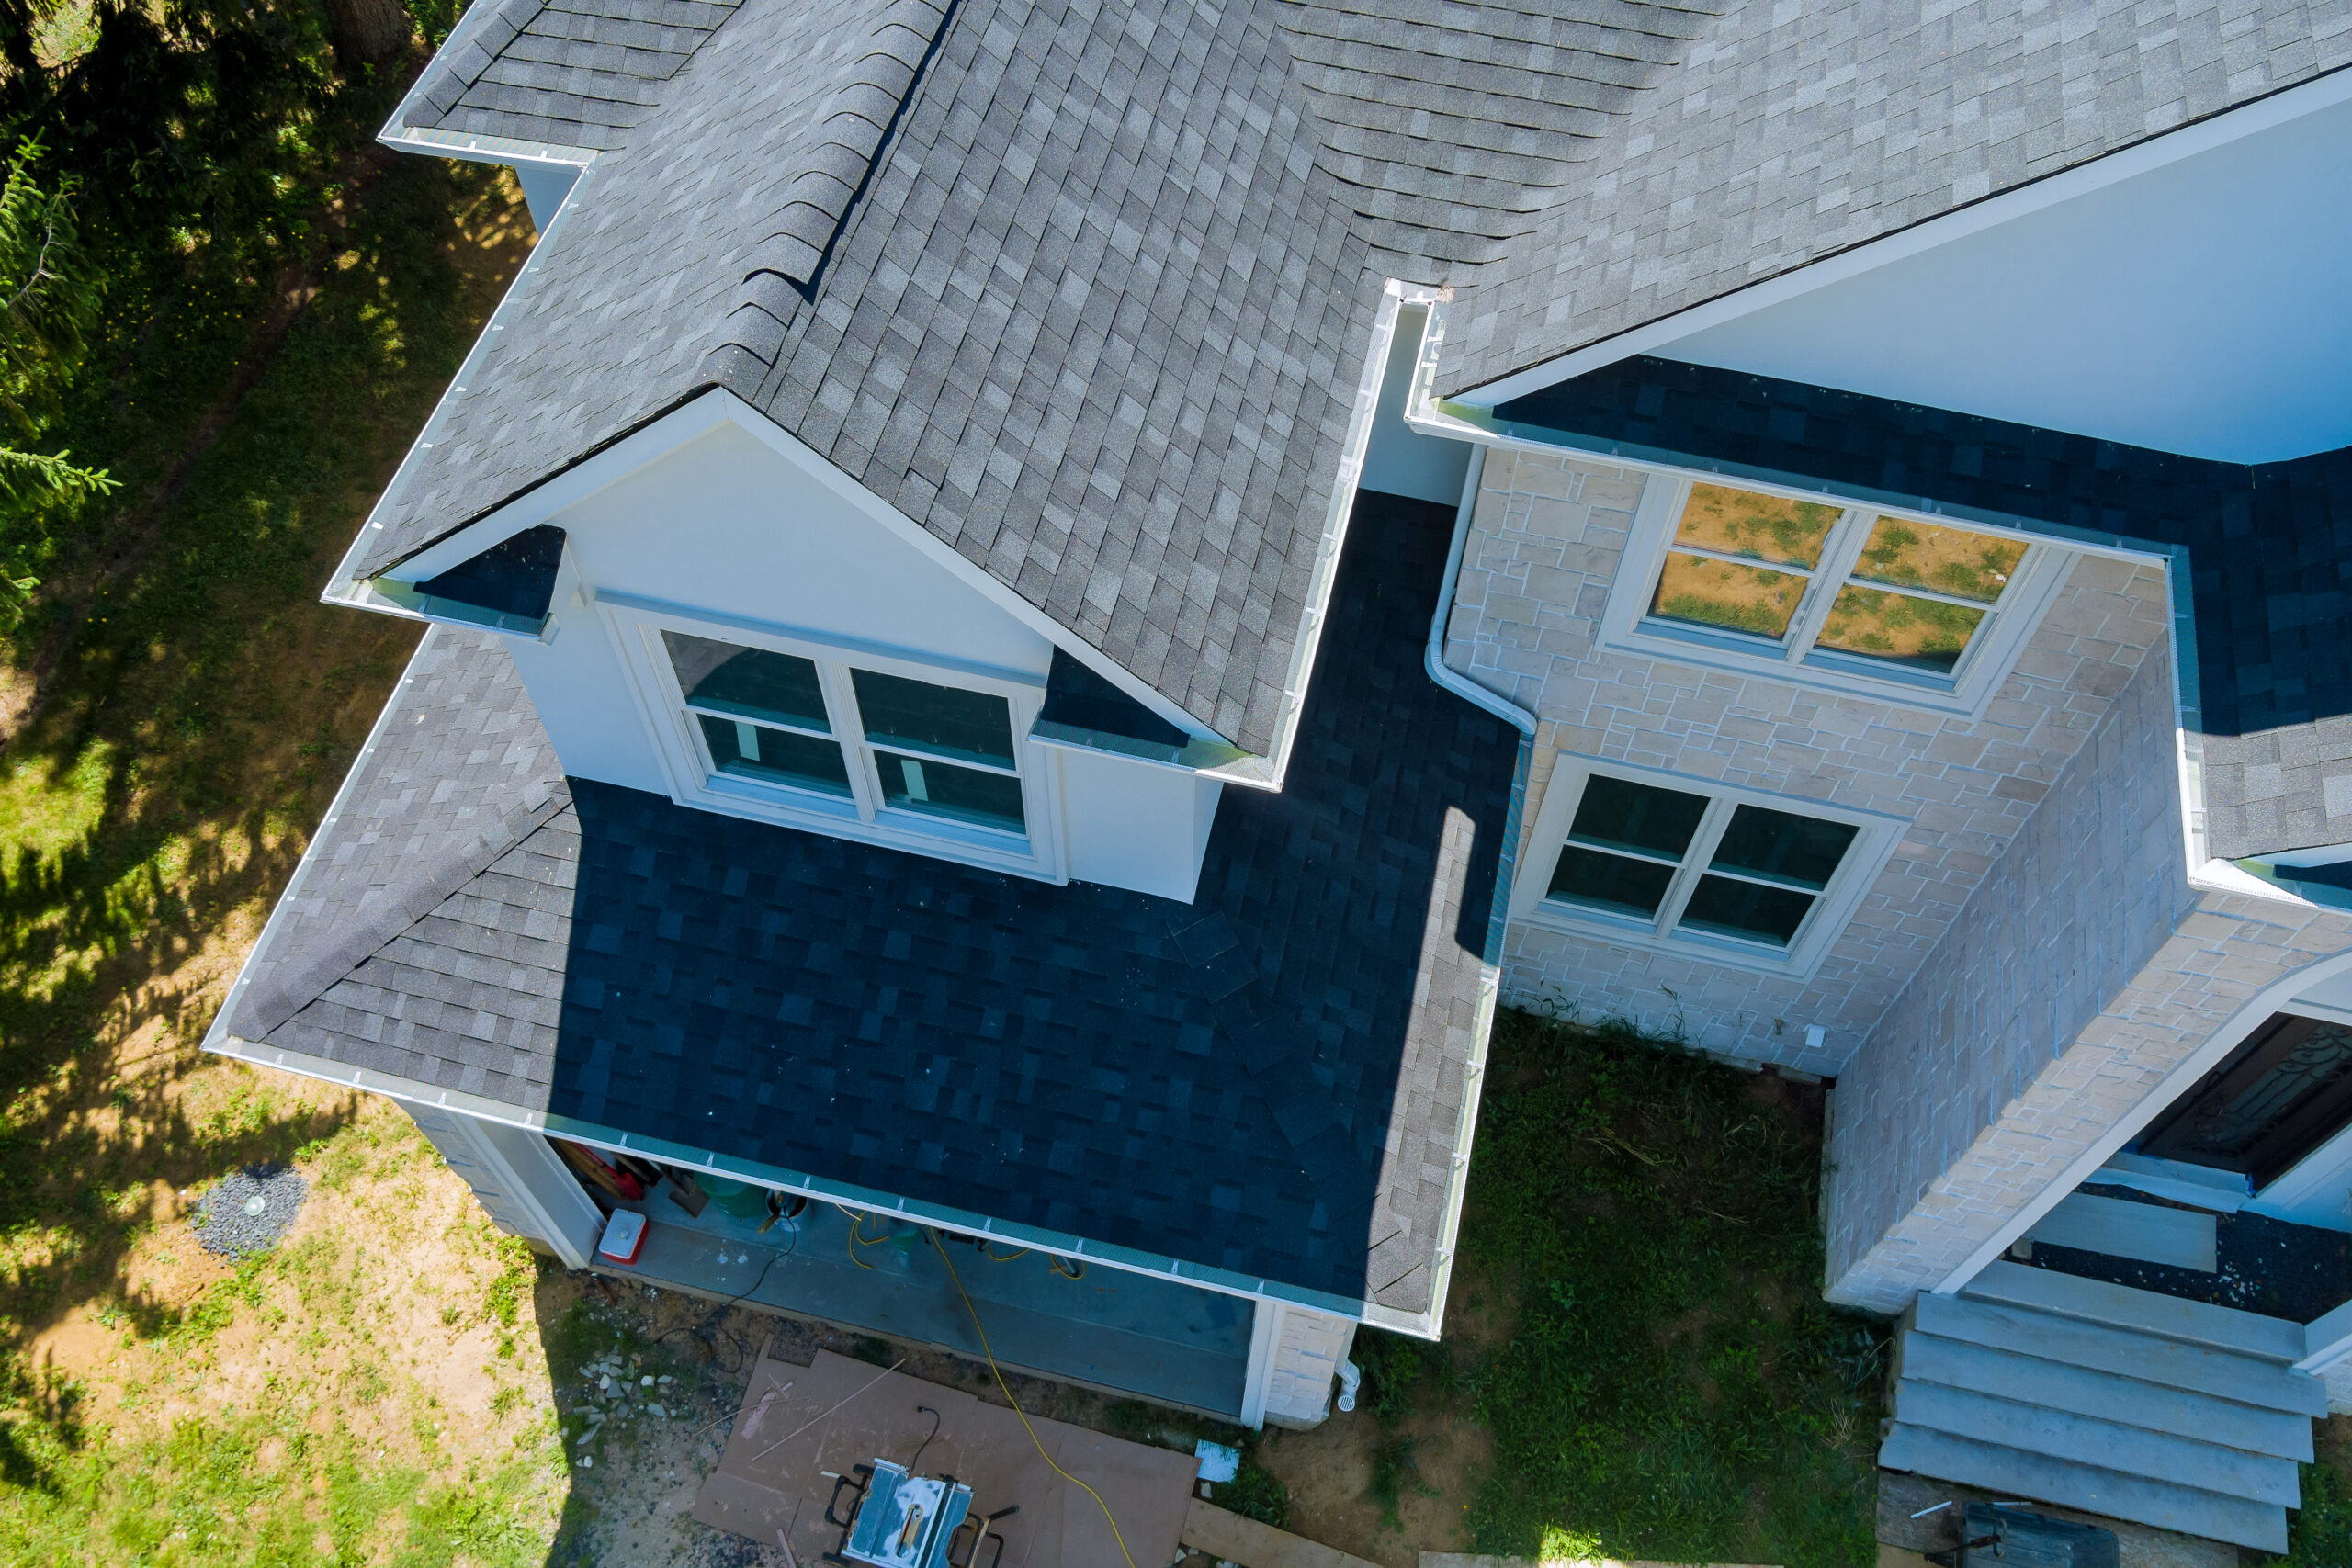 rooftop new home constructed showing asphalt shingles multiple roof lines with aerial view scaled